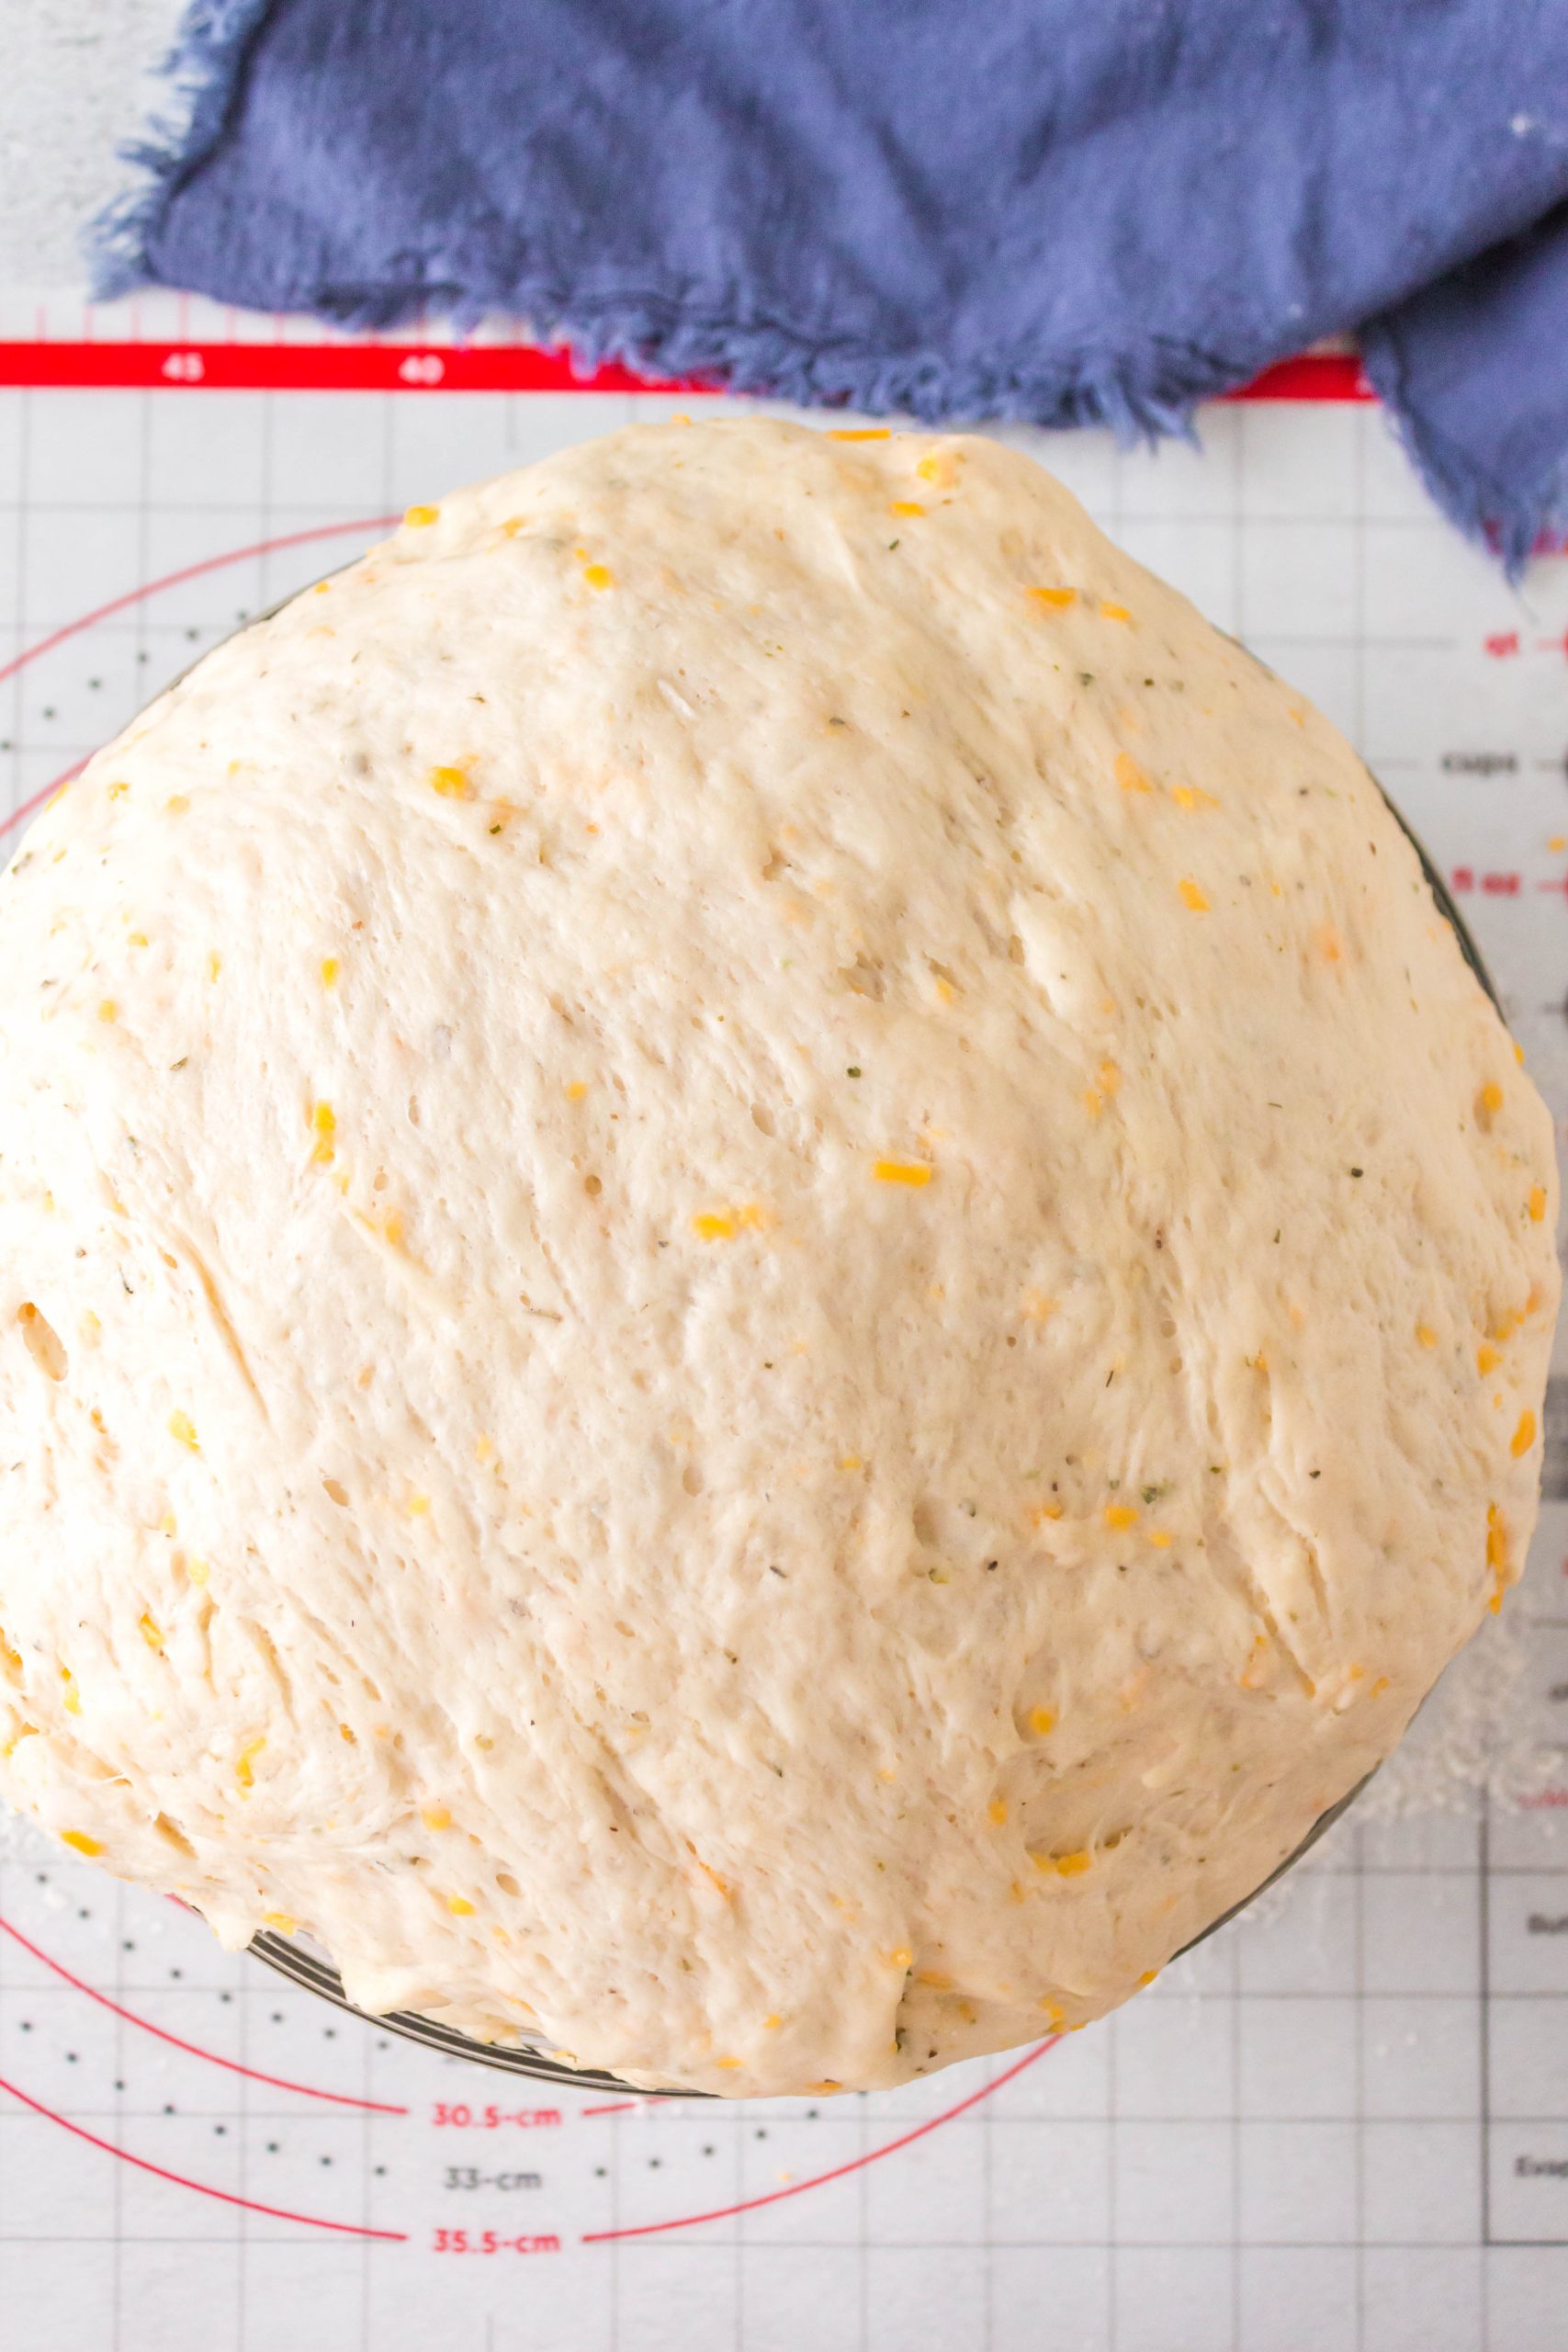 Proofed cheesy bread dough in a large bowl.